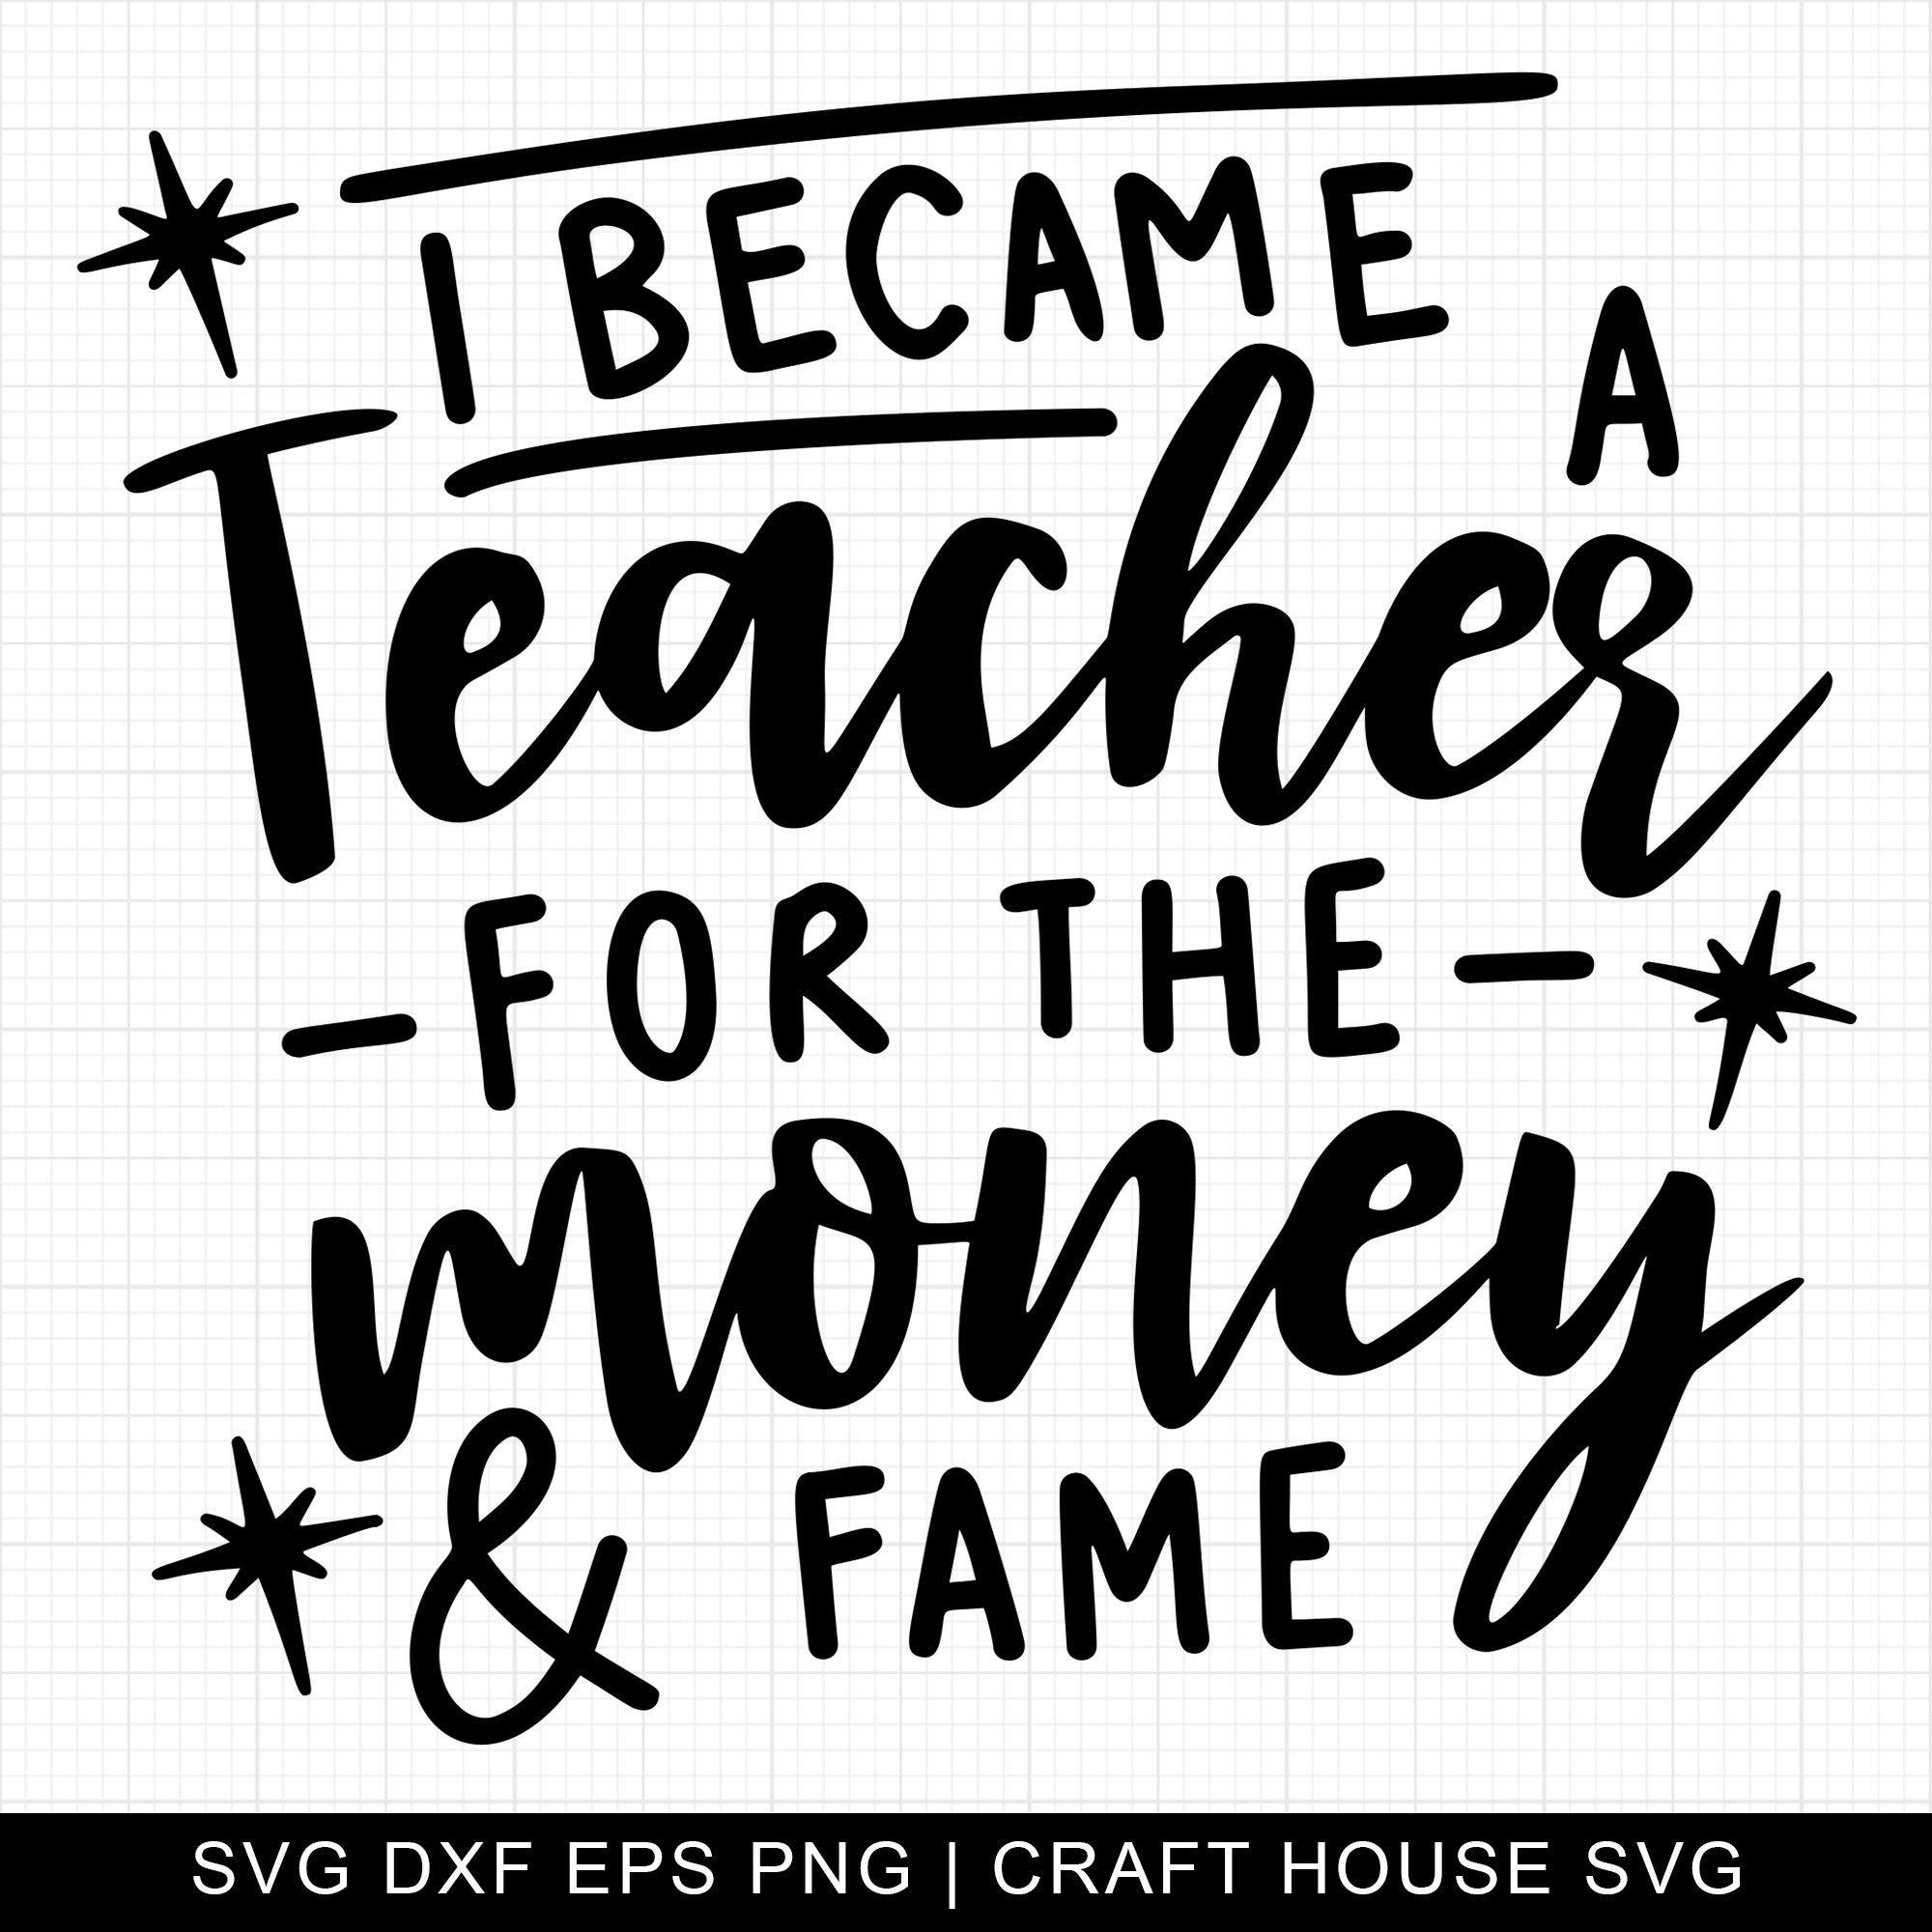 I became a teacher for the money and fame SVG | M5F7